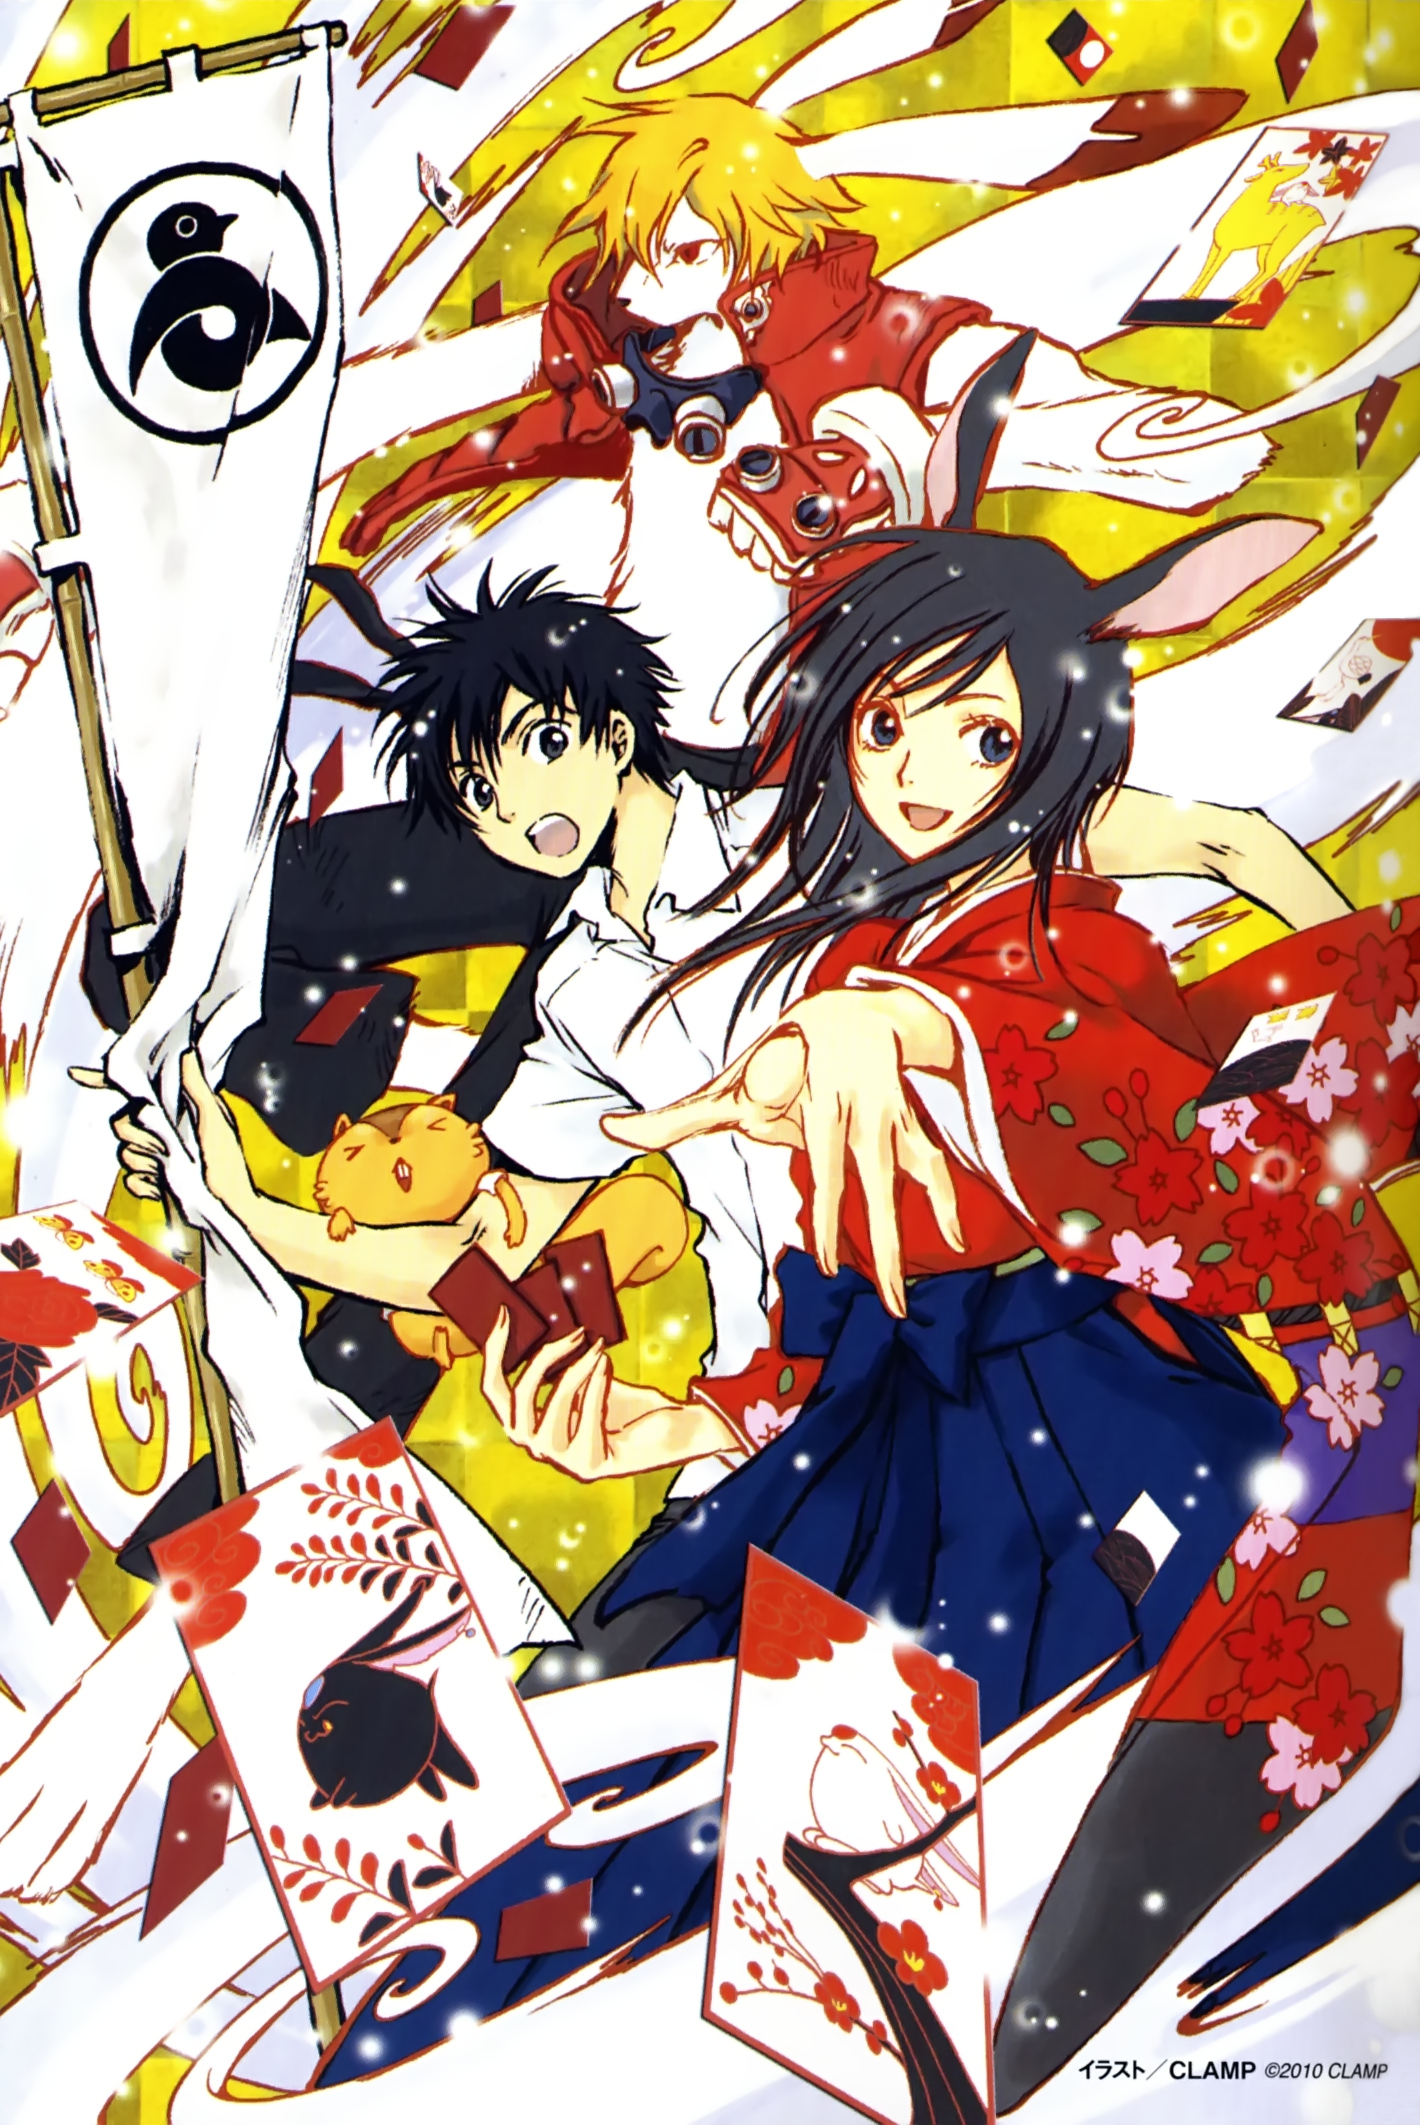 1420x2125 Summer Wars Wallpaper and Scan Gallery Minitoky